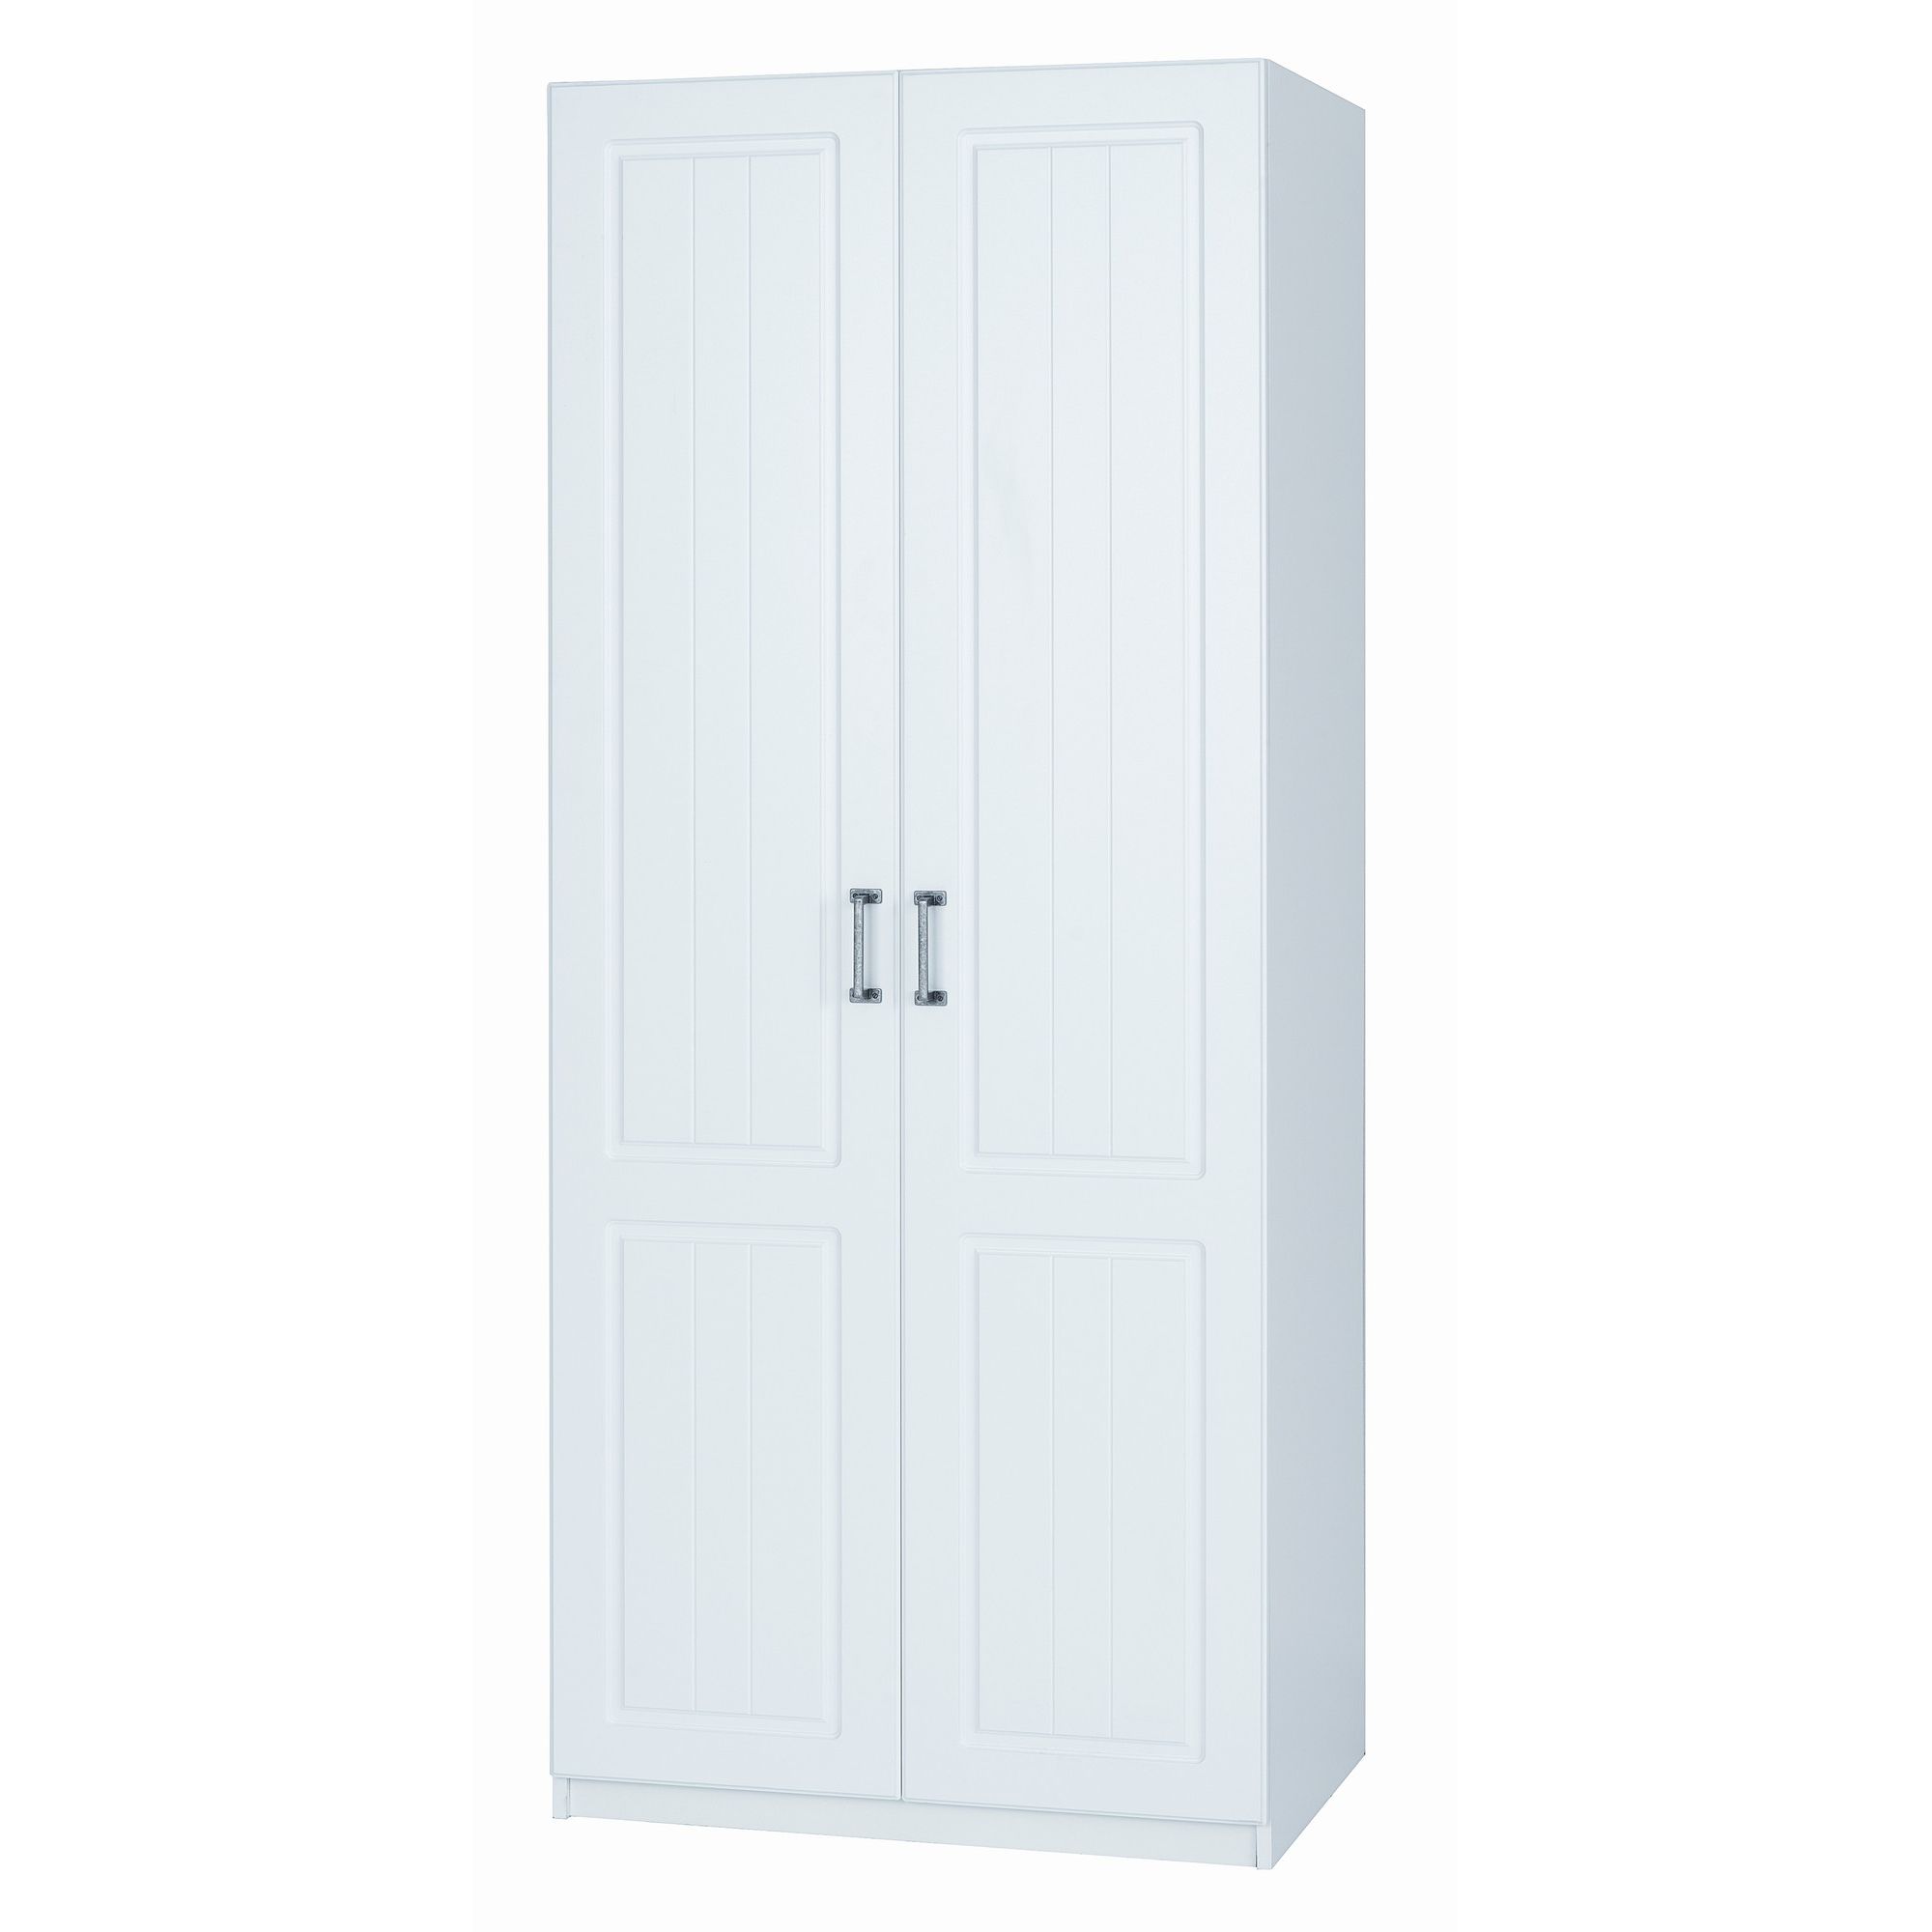 Alto Furniture Visualise Century Two Door Wardrobe in Pearl White at Tesco Direct